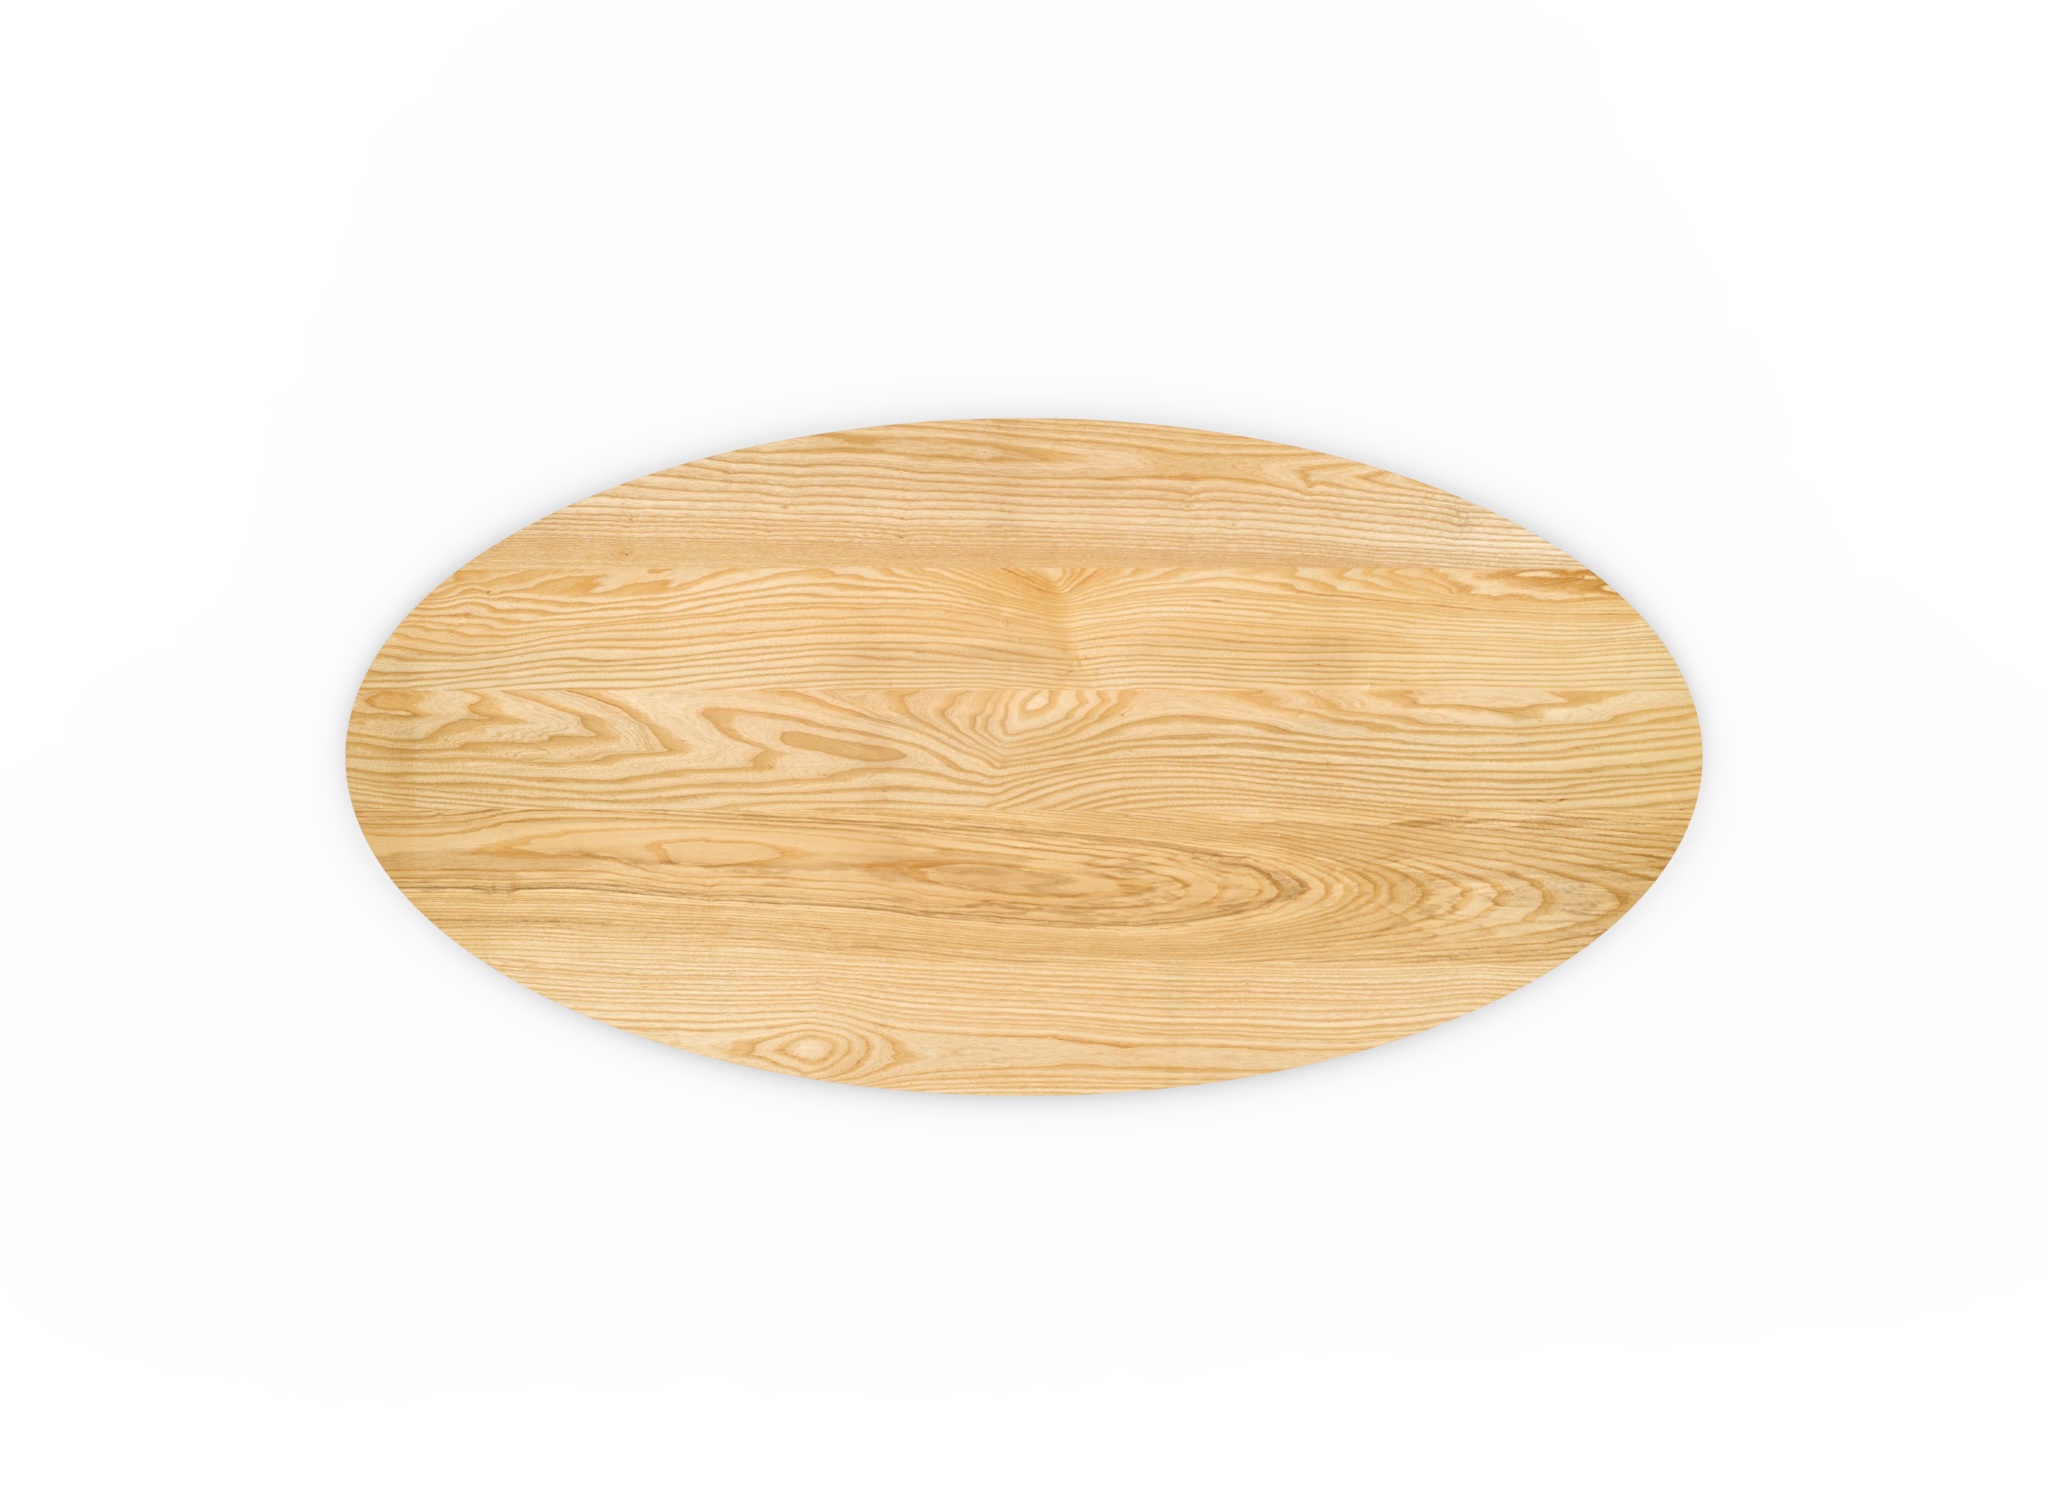 Vermont Farm Table Custom Solid Wood Table Top 36x72 Oval Ash